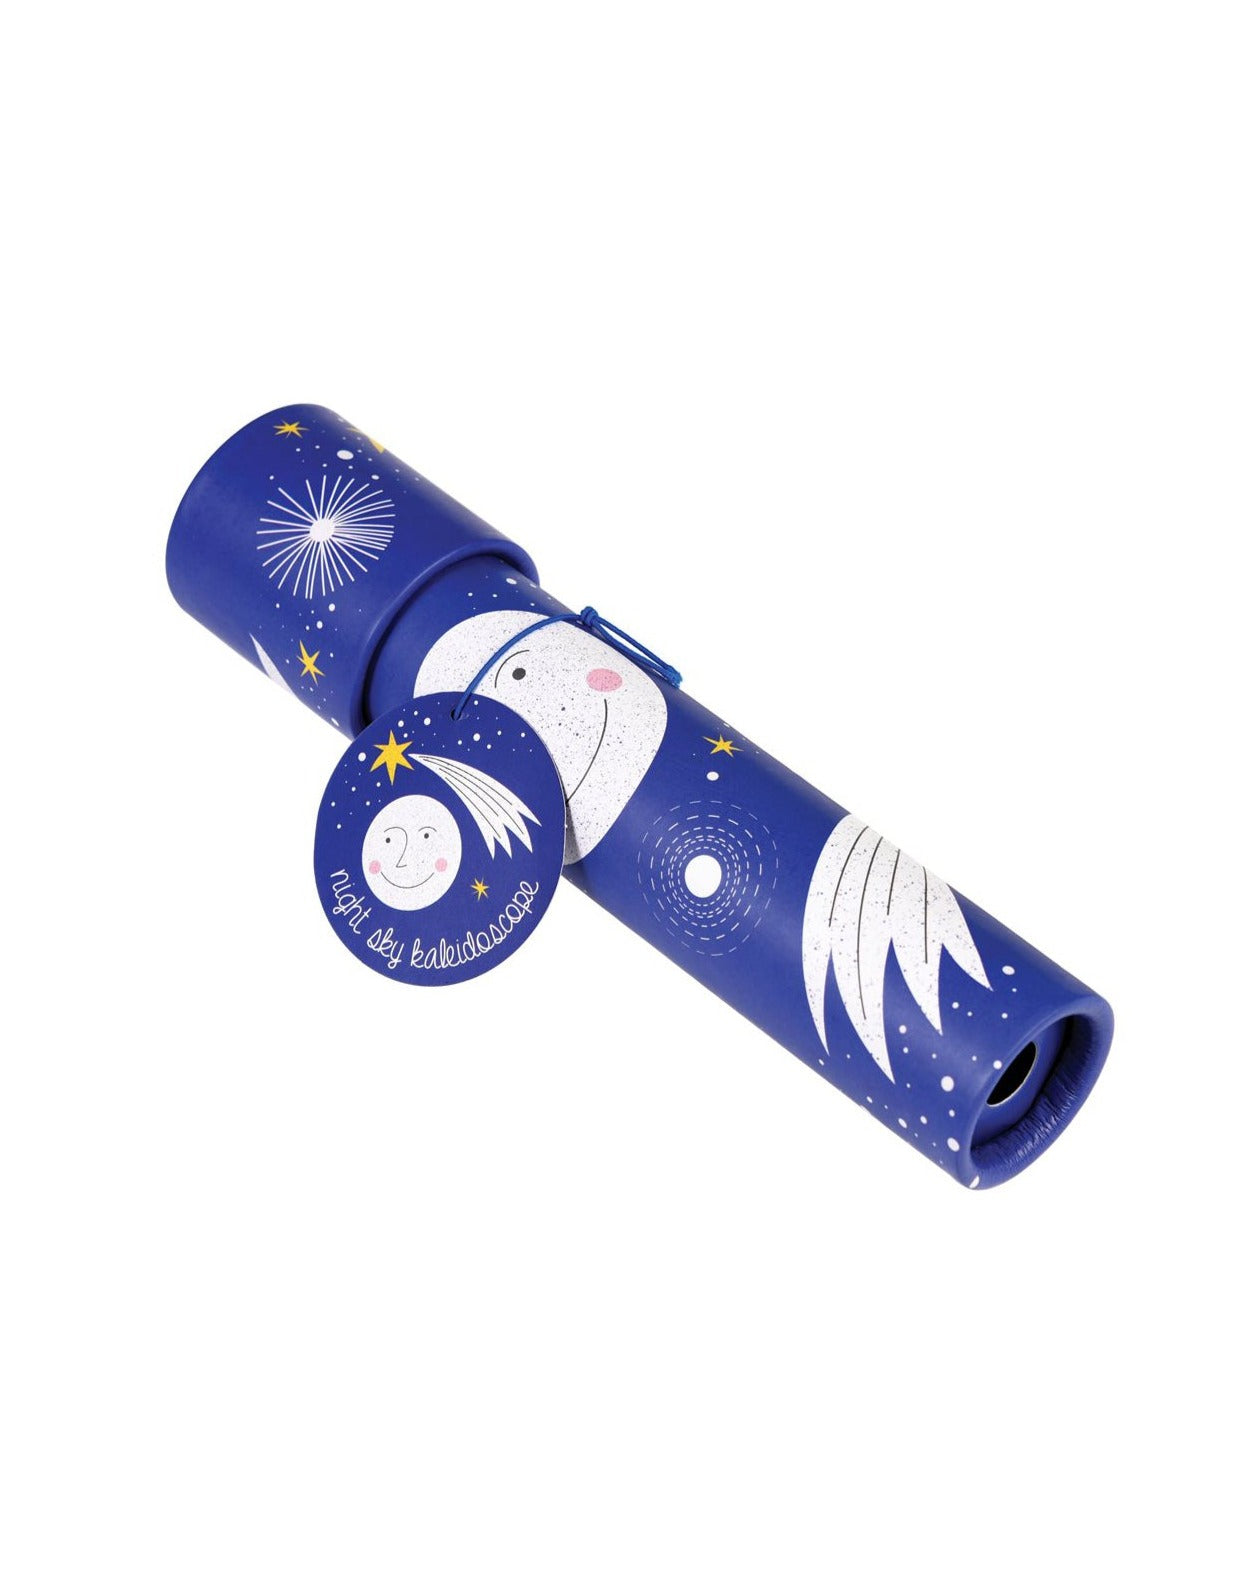 The Every Space Astronomy Kaleidoscope in blue with moon and star decoration by Rex London